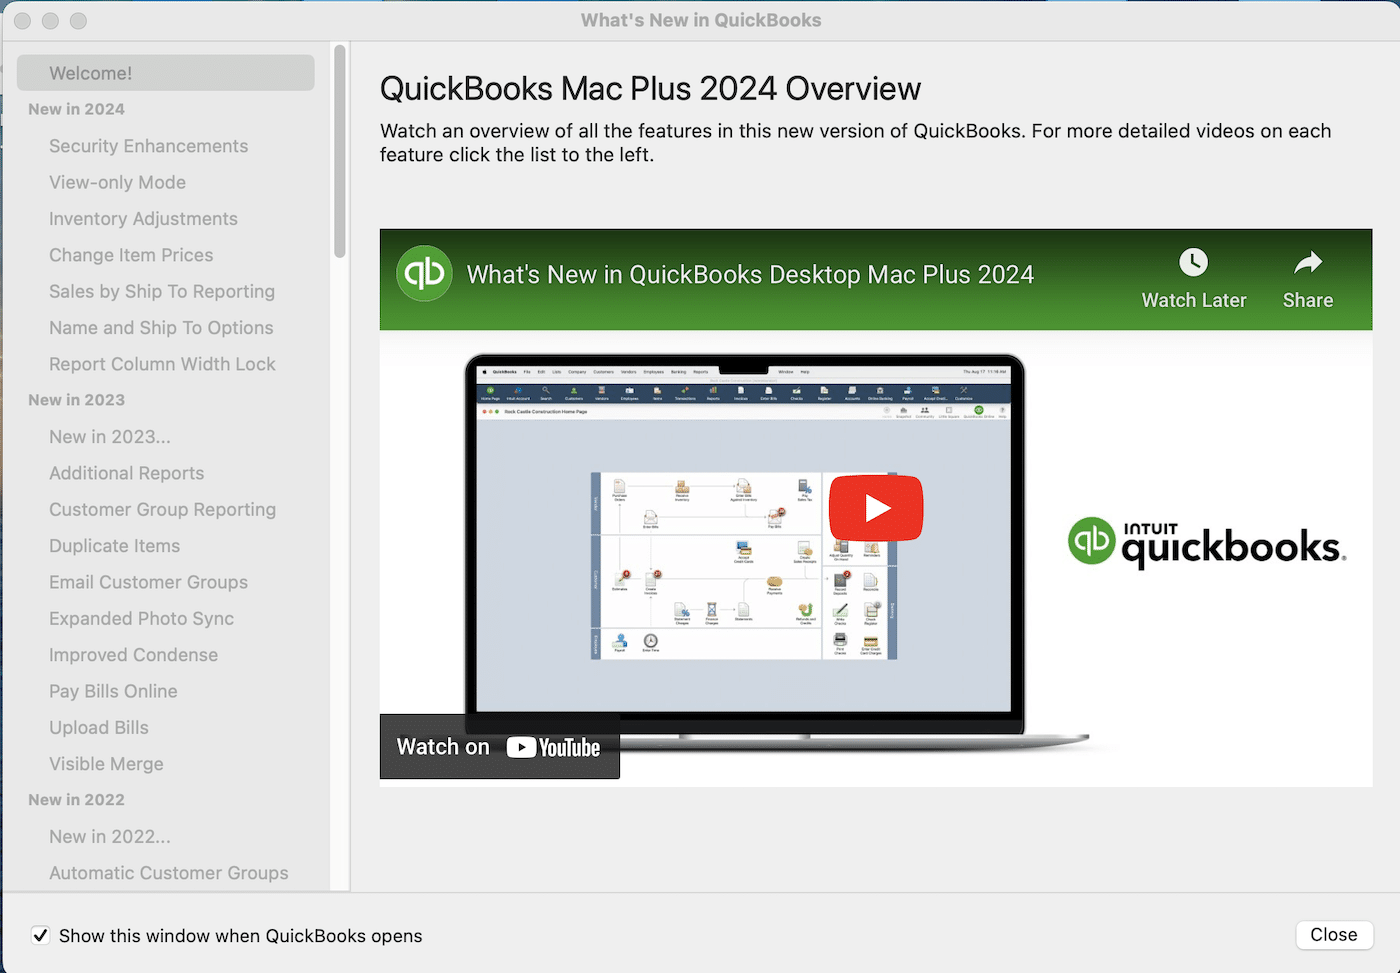 Welcome to QuickBooks Mac Plus 2024 Overview